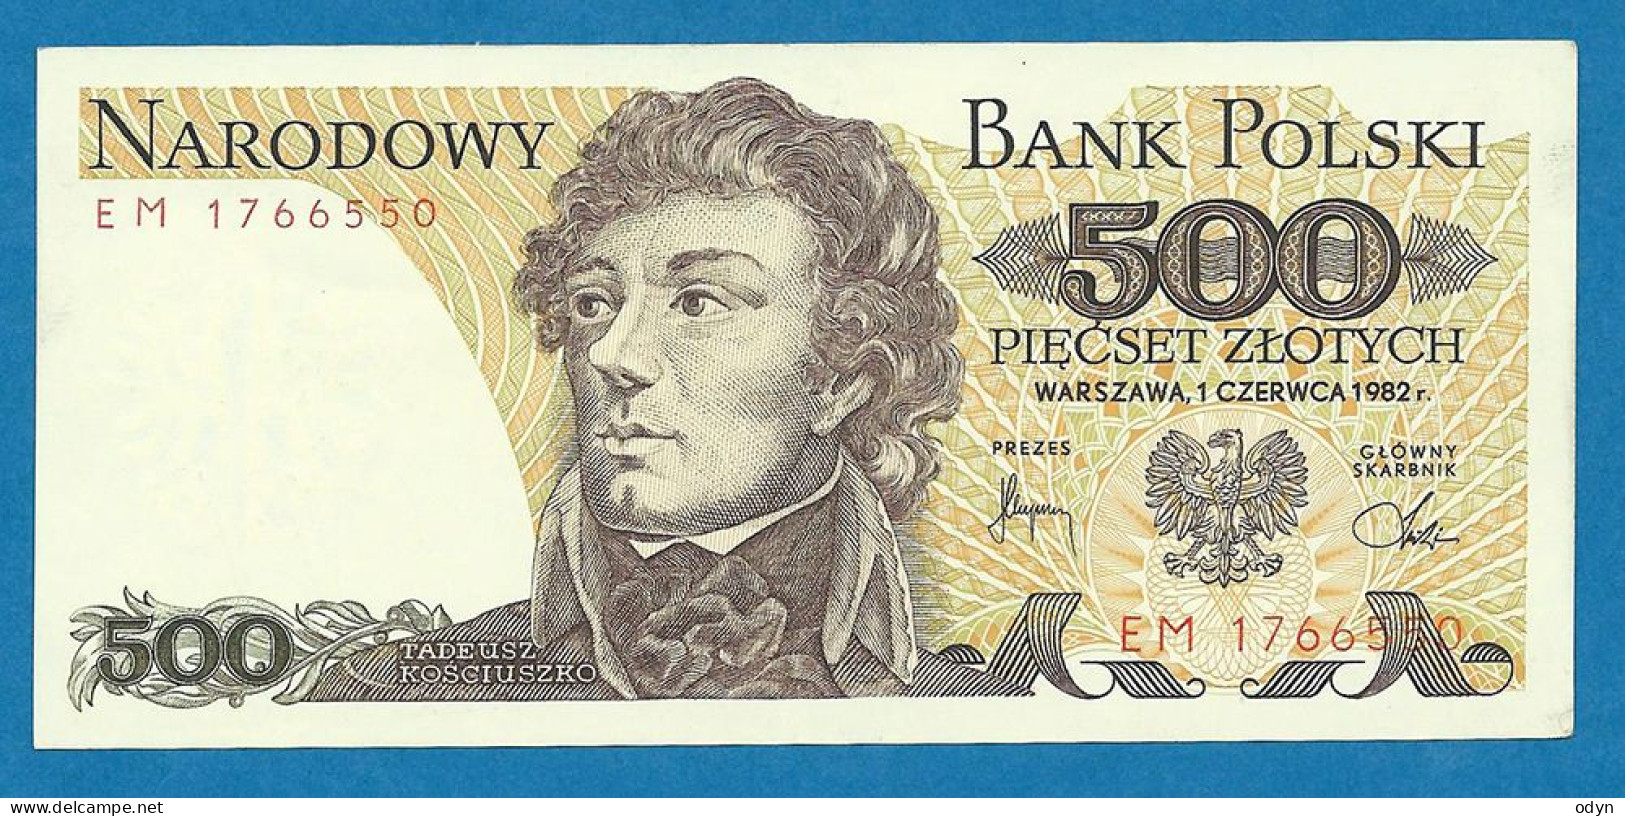 Poland, 1982, 1986, 1988; lot of 11 banknotes 20, 50, 500 and 1000 zlotych, UNC, -UNC, AU - see description